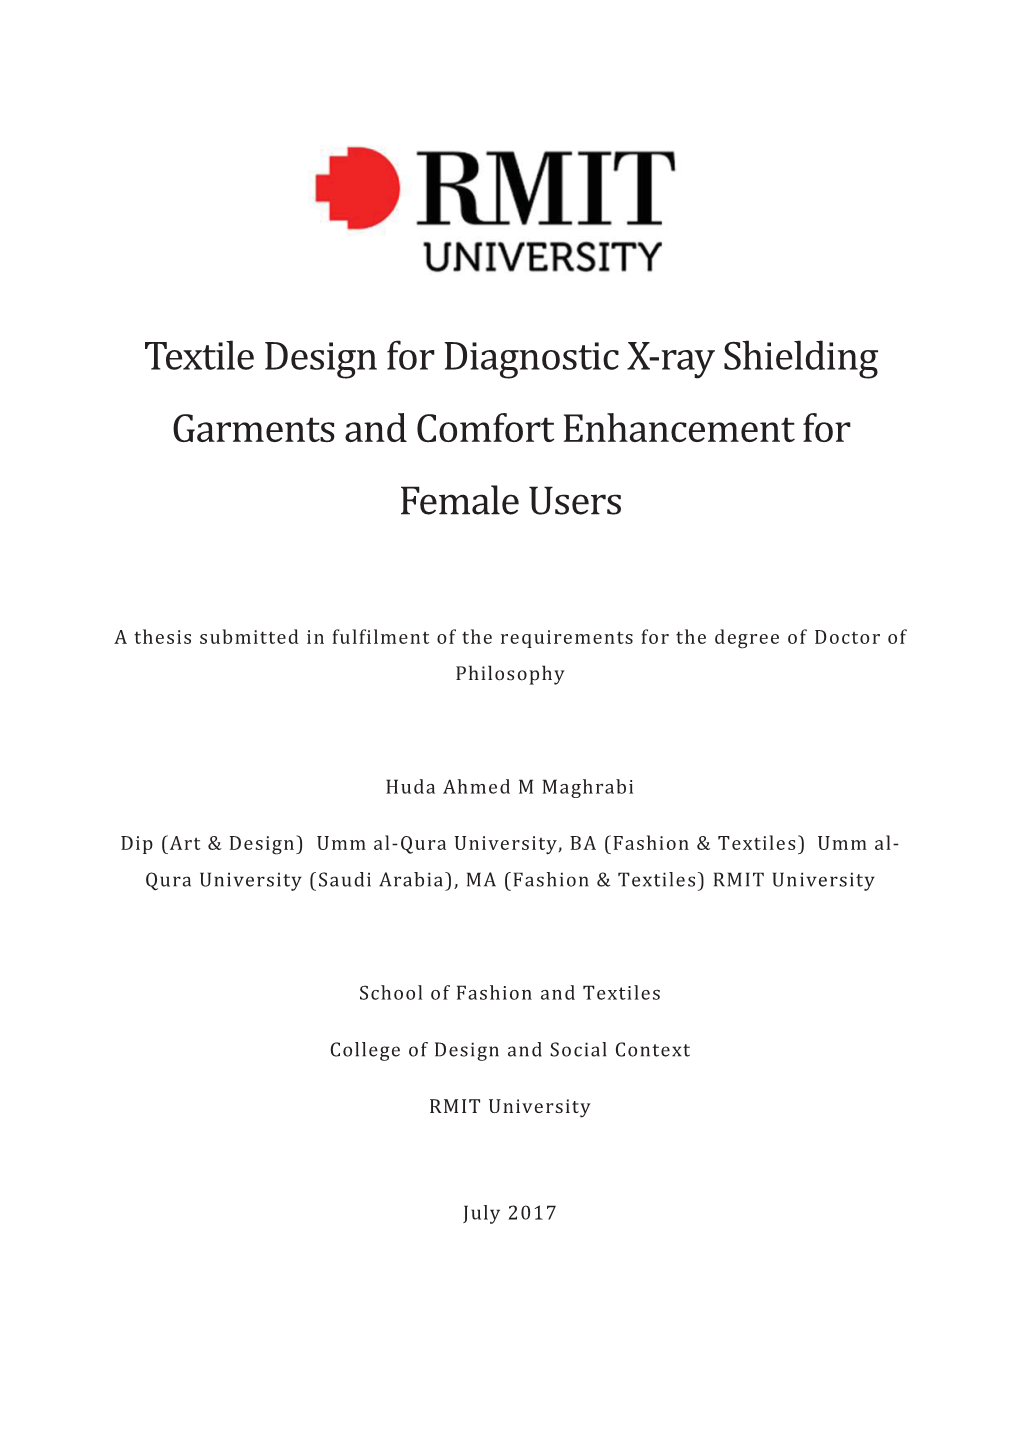 Textile Design for Diagnostic X-Ray Shielding Garments and Comfort Enhancement for Female Users